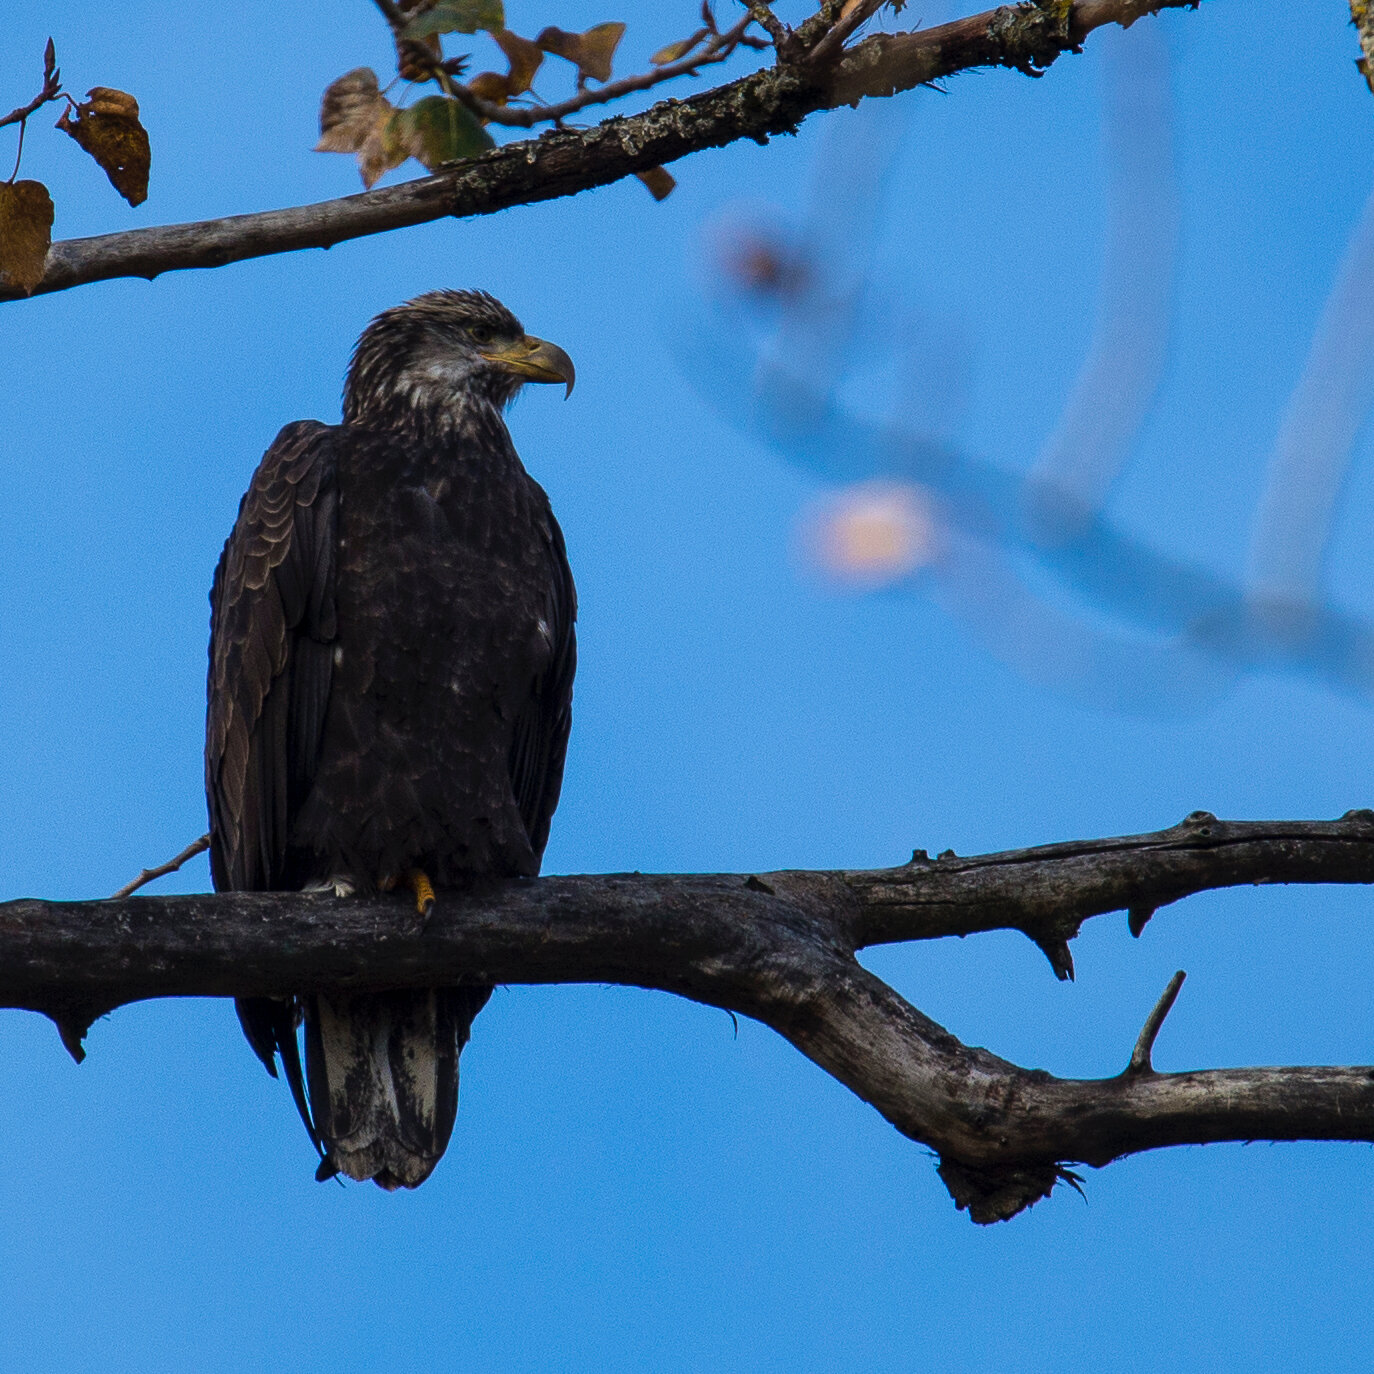  This was the closest I came - a juvenile bald eagle. 